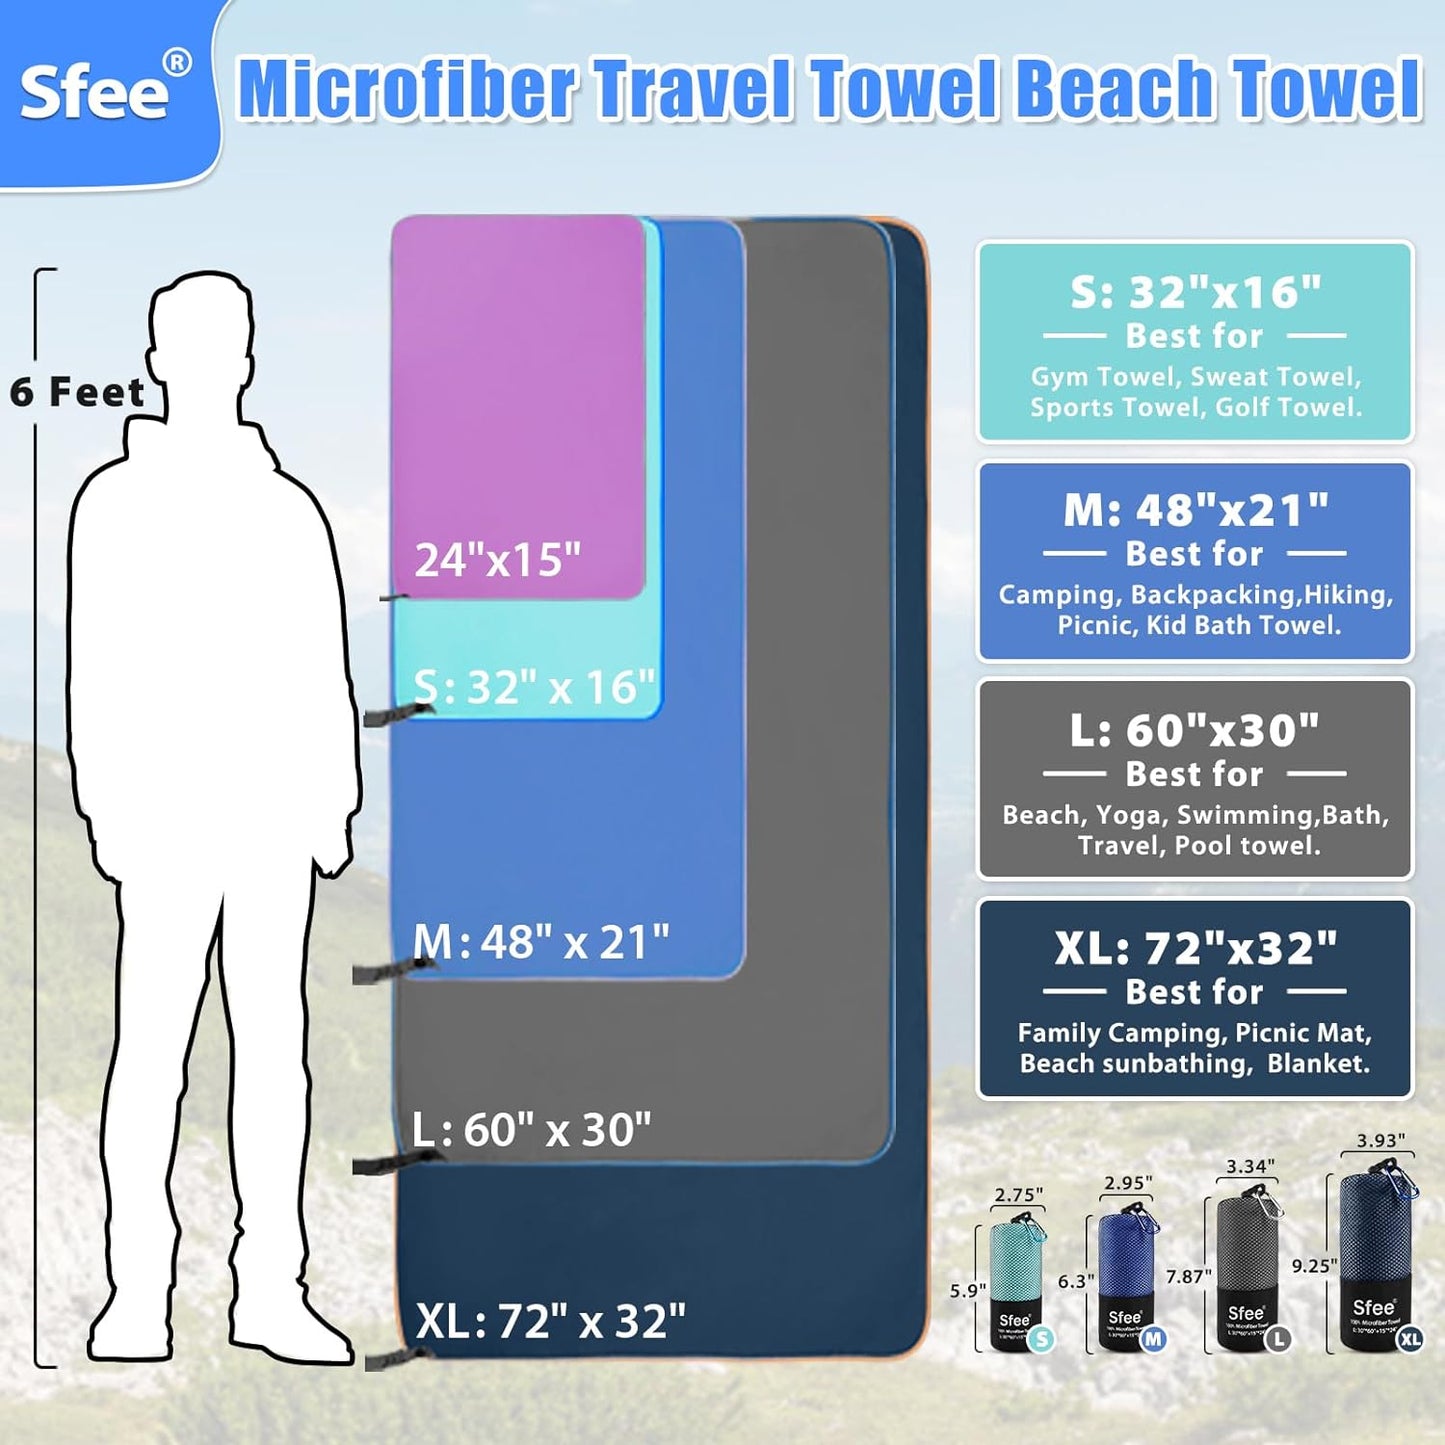 2 Pack Microfiber Travel Towel, Quick Dry Towel Camping Towel Beach Towels, Super Absorbent Compact Lightweight Sport Towel Gym Towel for Travel, Beach, Hiking, Gym, Pool, Bath, Yoga, Backpacking